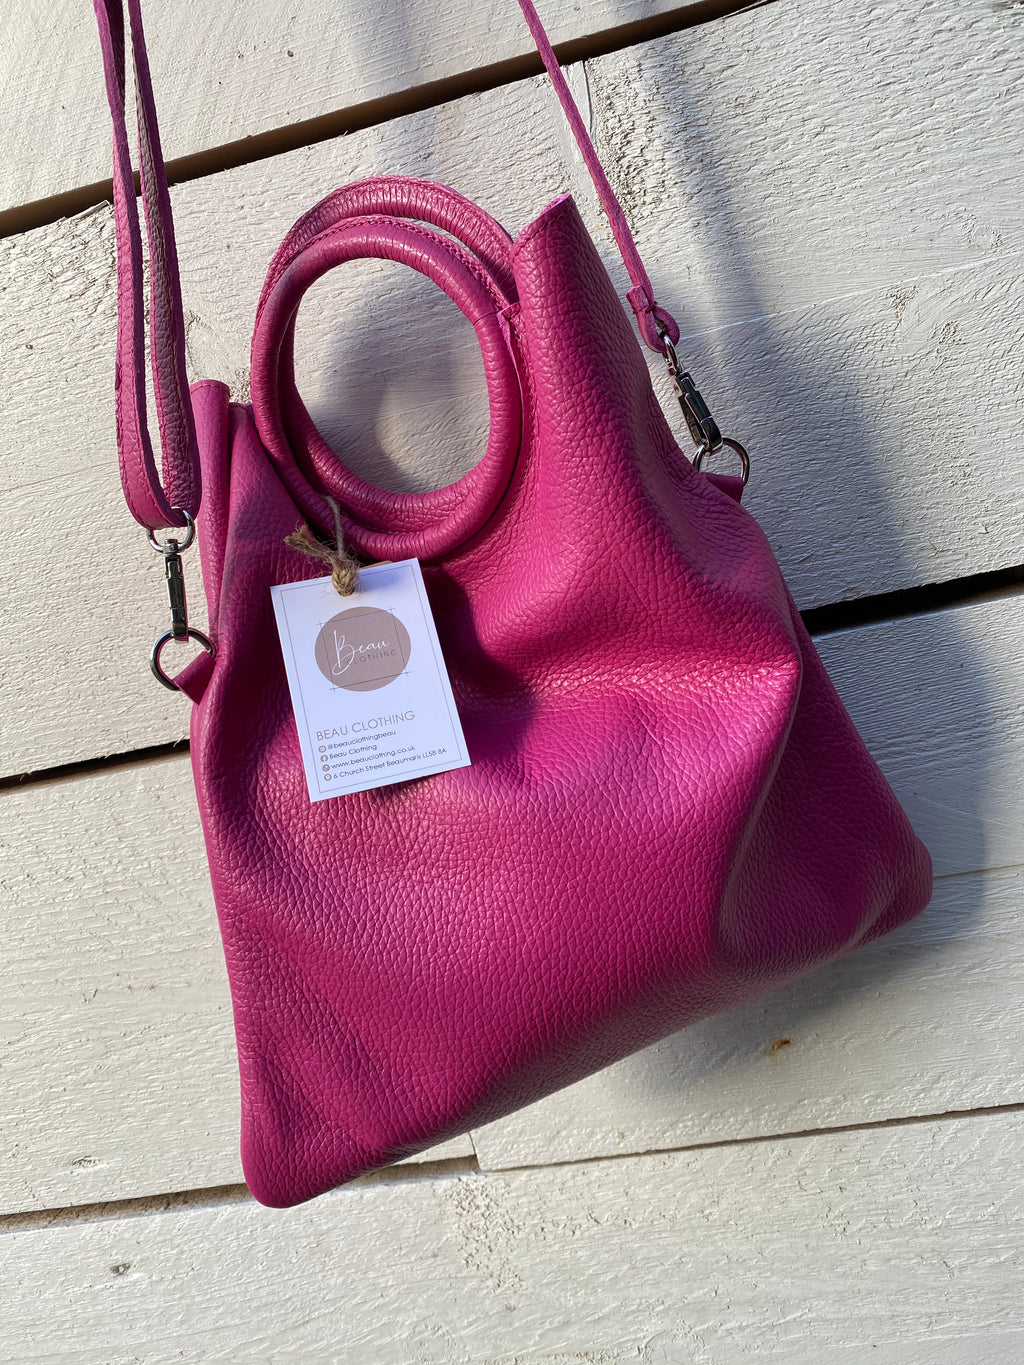 Real leather bag - pink